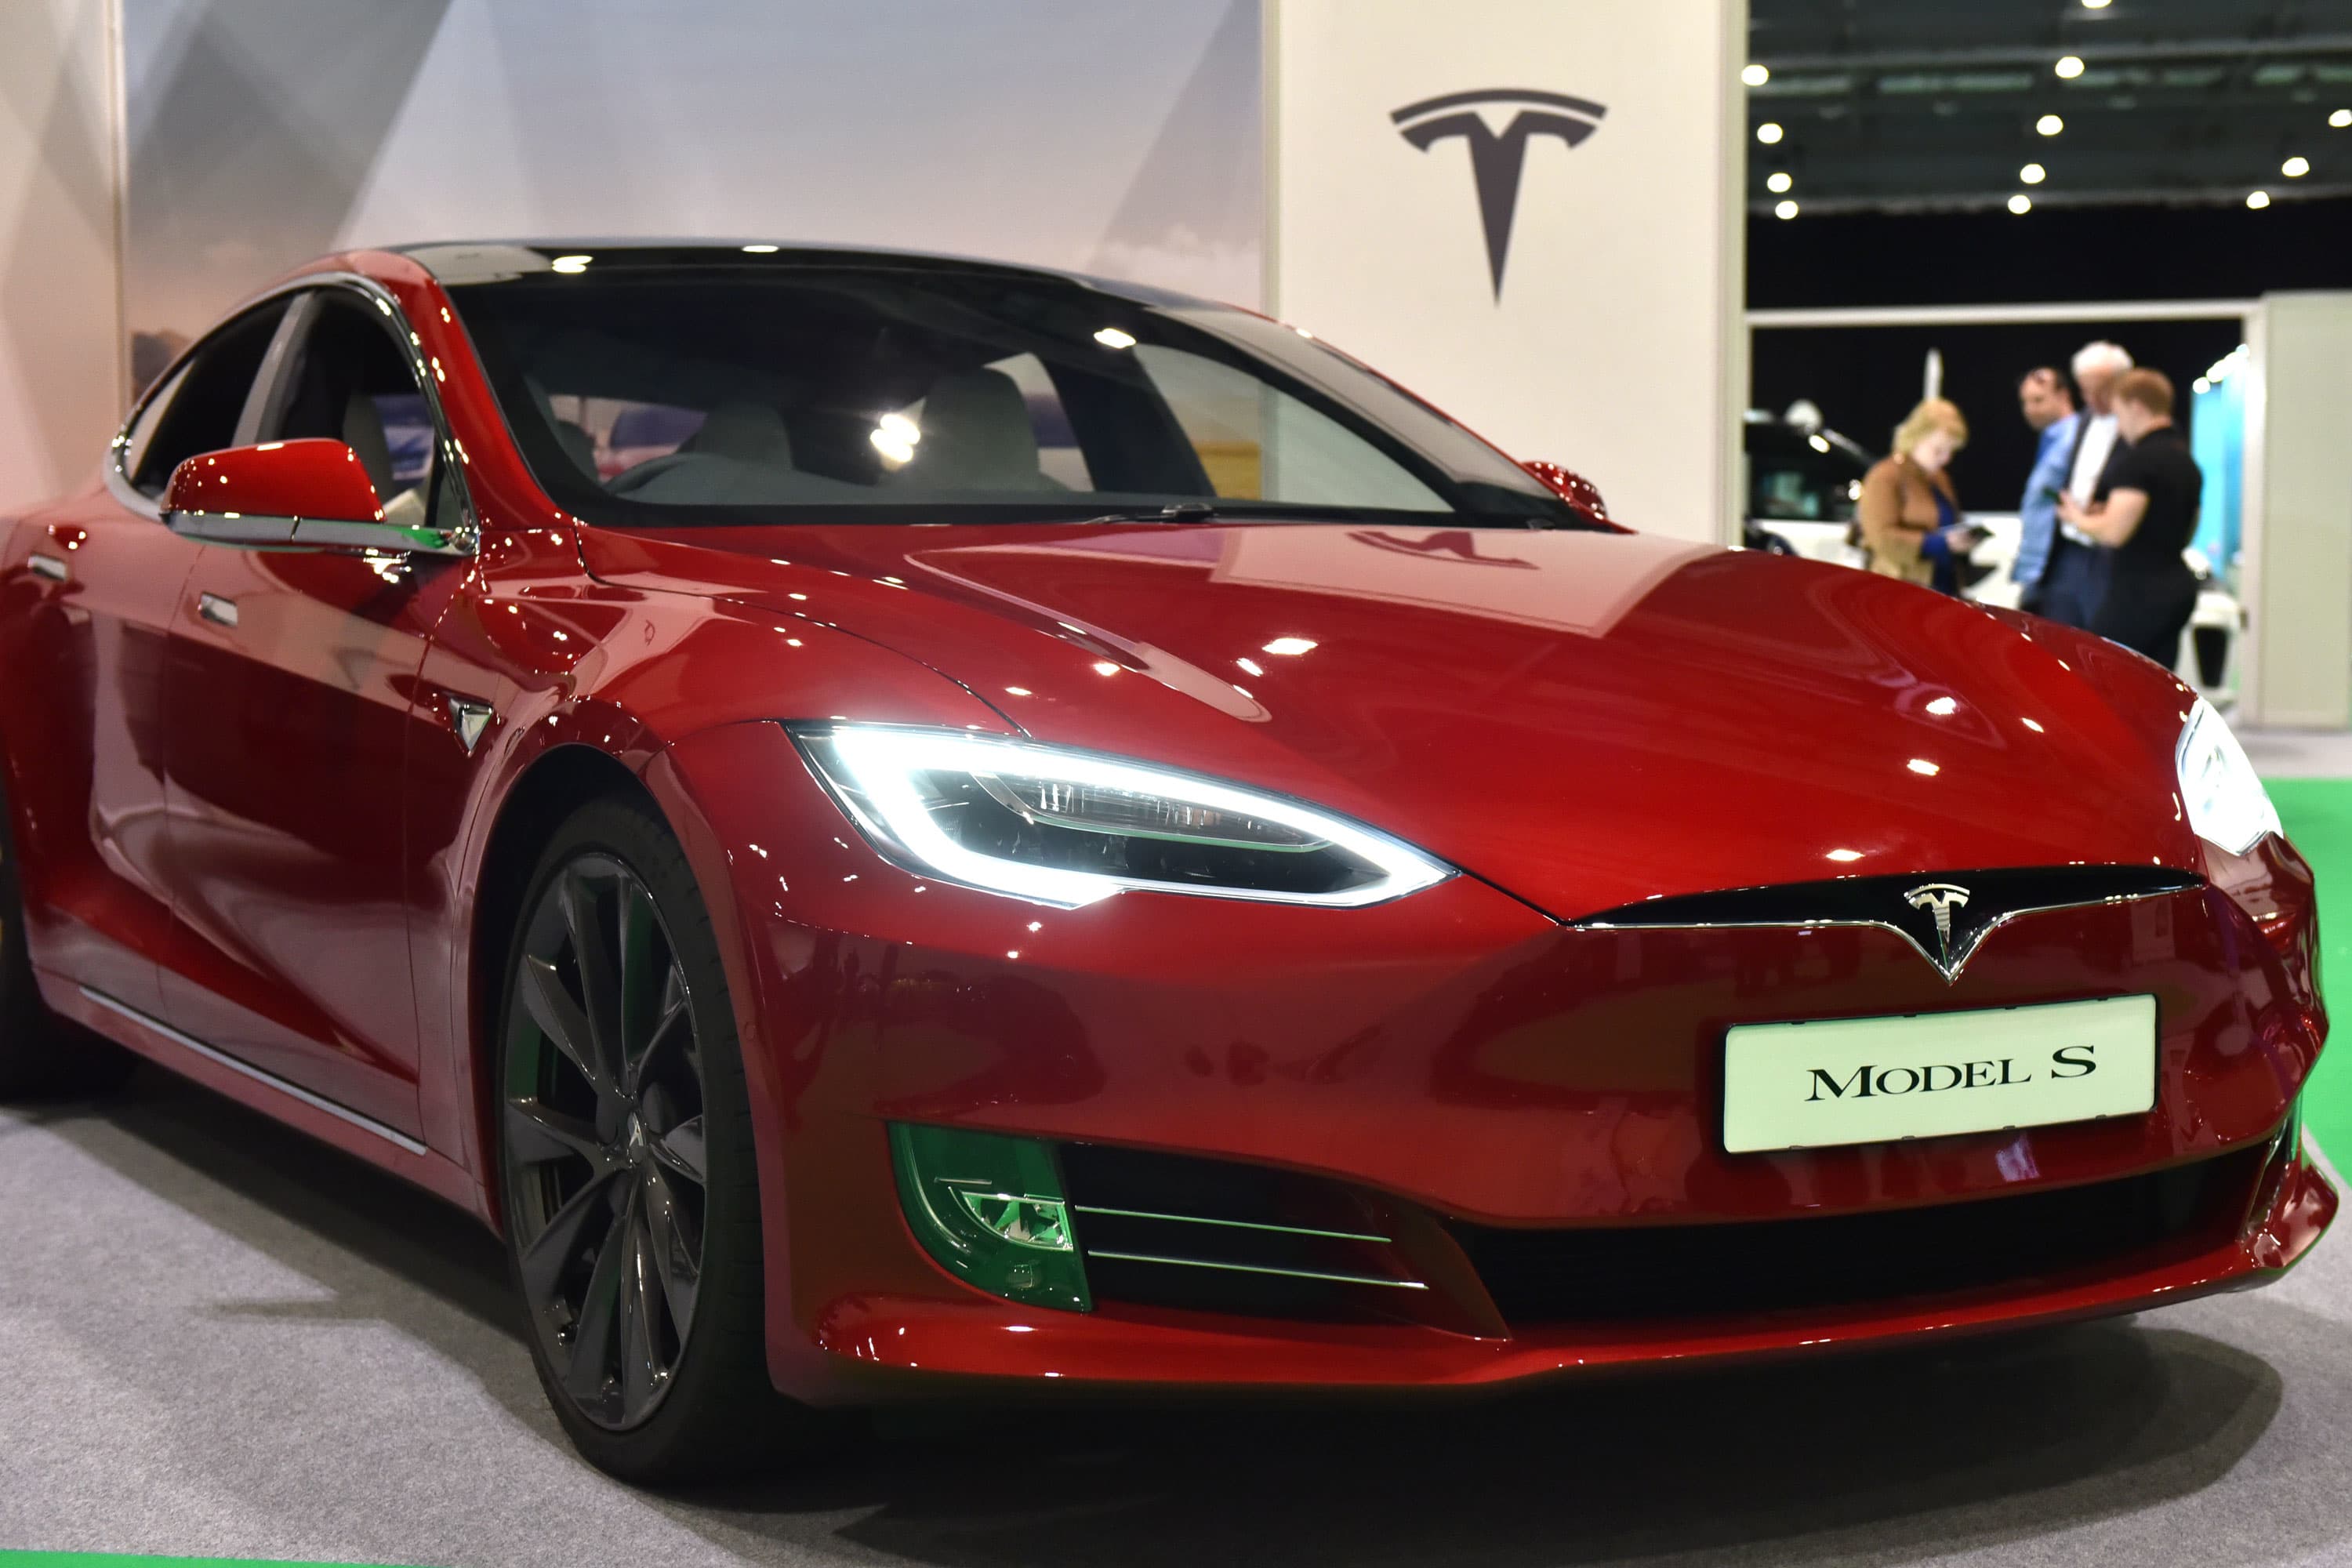 why tesla stock seems expensive even pared to other tech stocks